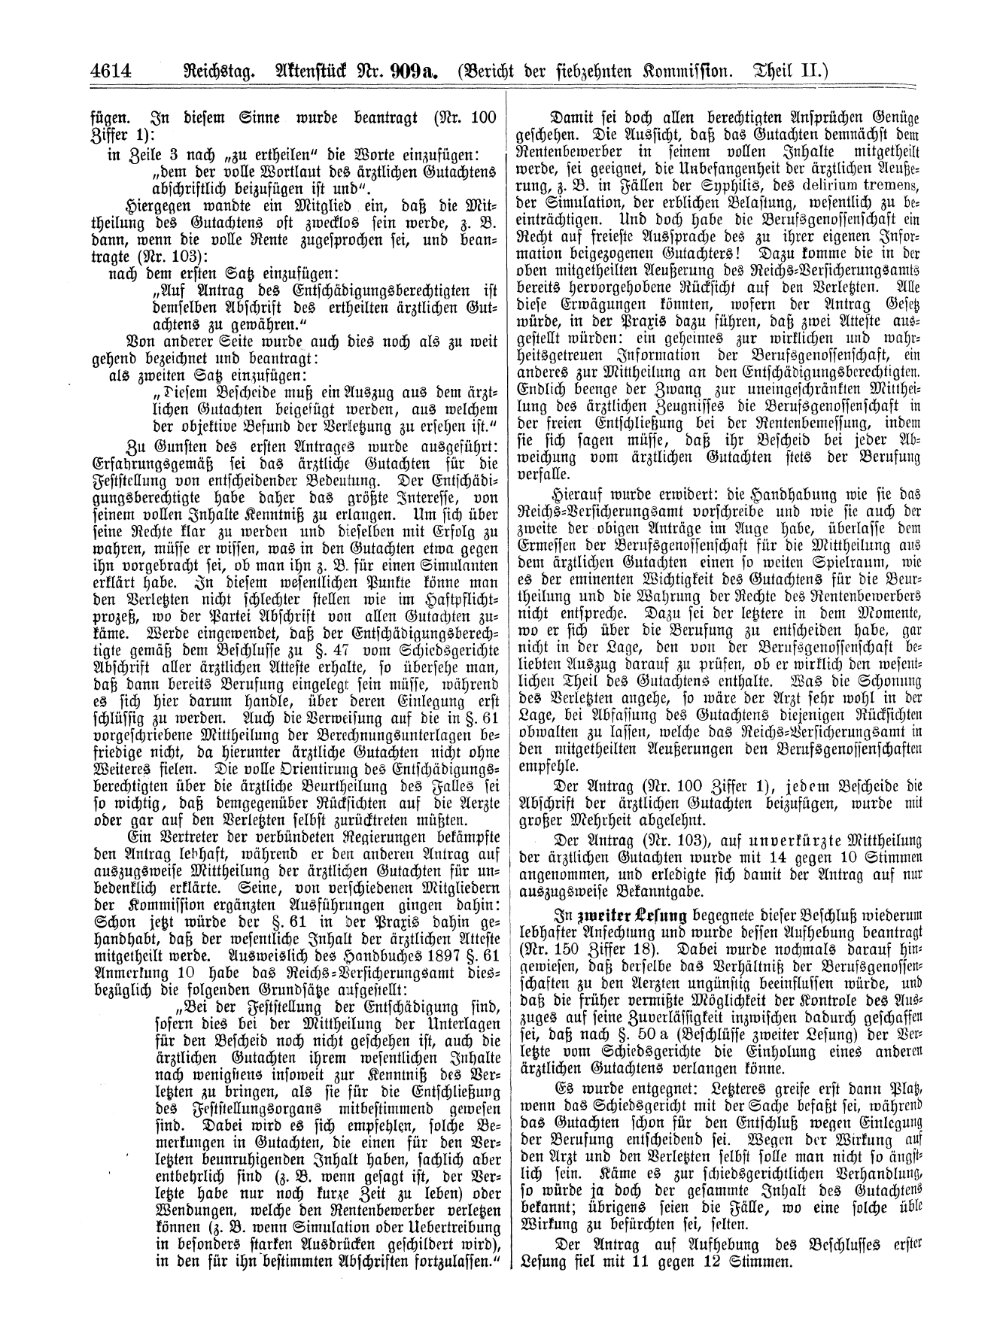 Scan of page 4614